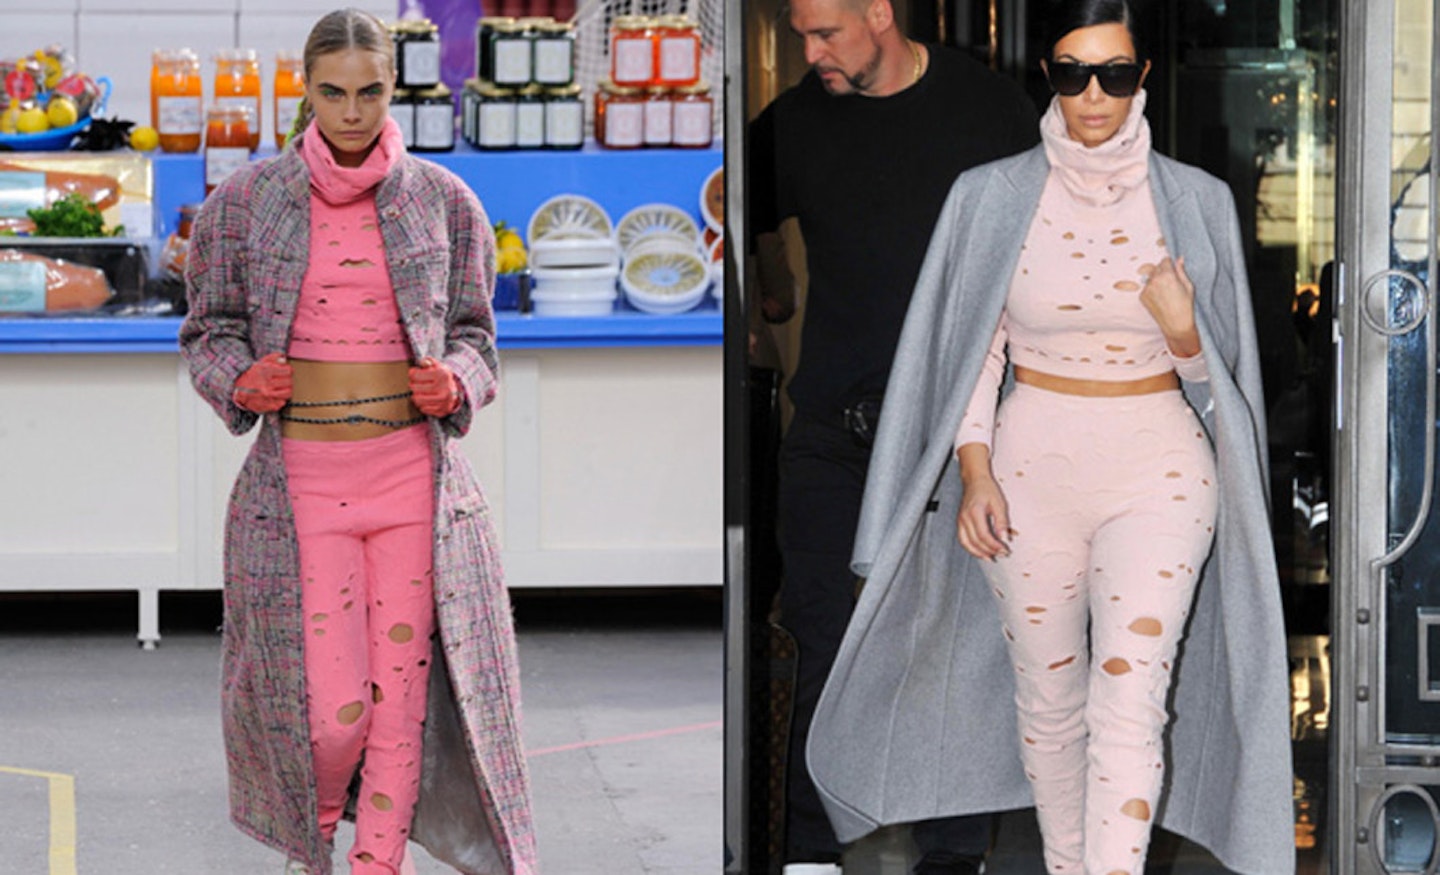 Kim Kardashian Steps Out In THAT Pink, Ripped Chanel Runway Look